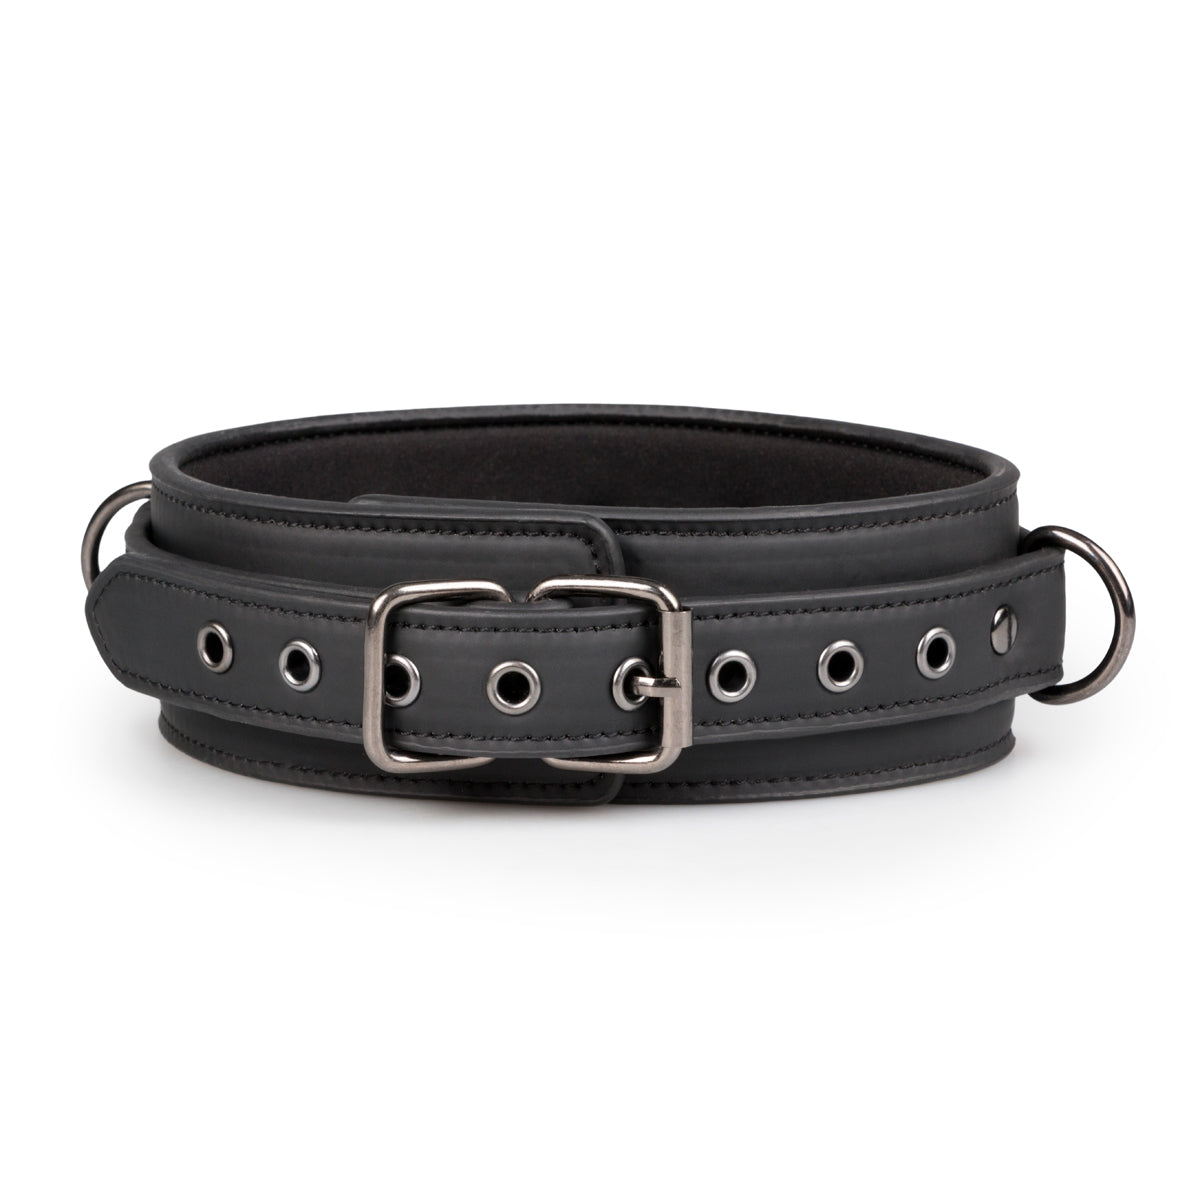 Fetish collar With Leash - Just for you desires